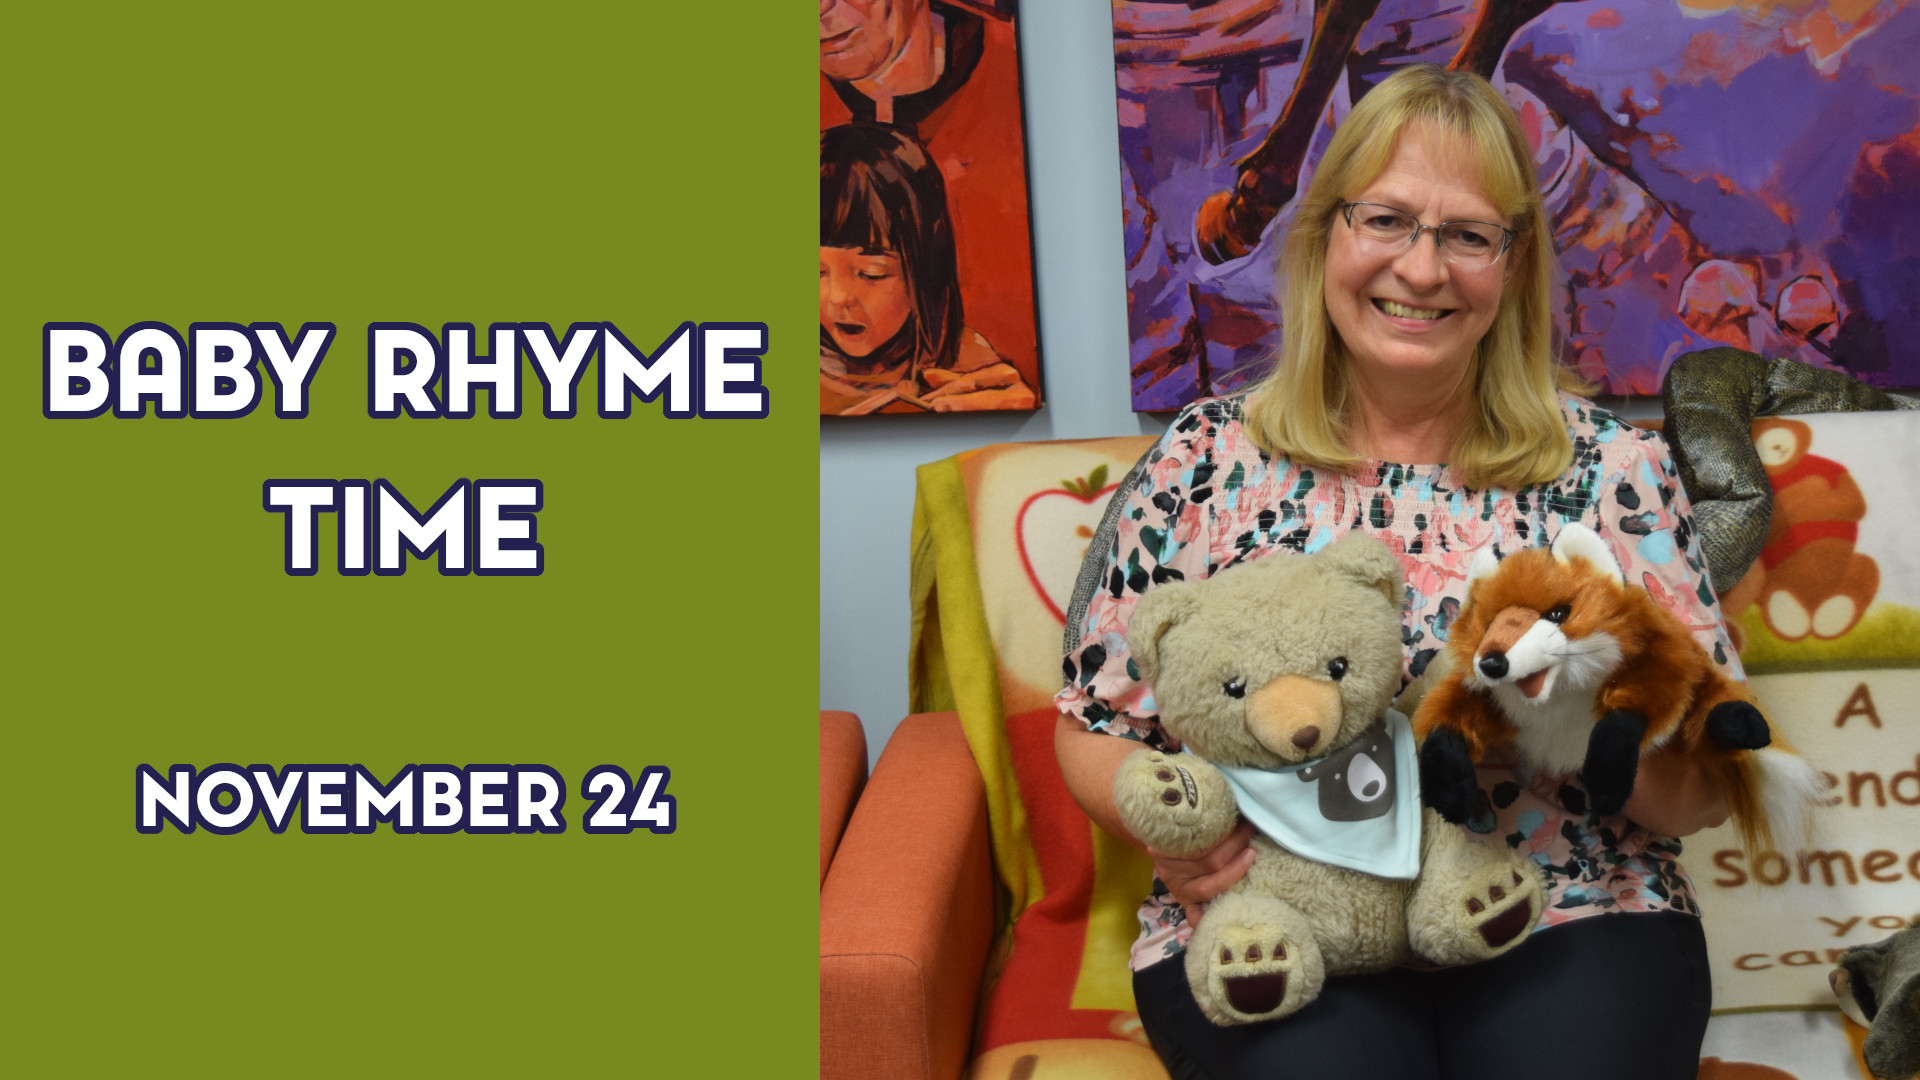 A woman holds stuffed animals next to the text "Baby Rhyme Time November 24"